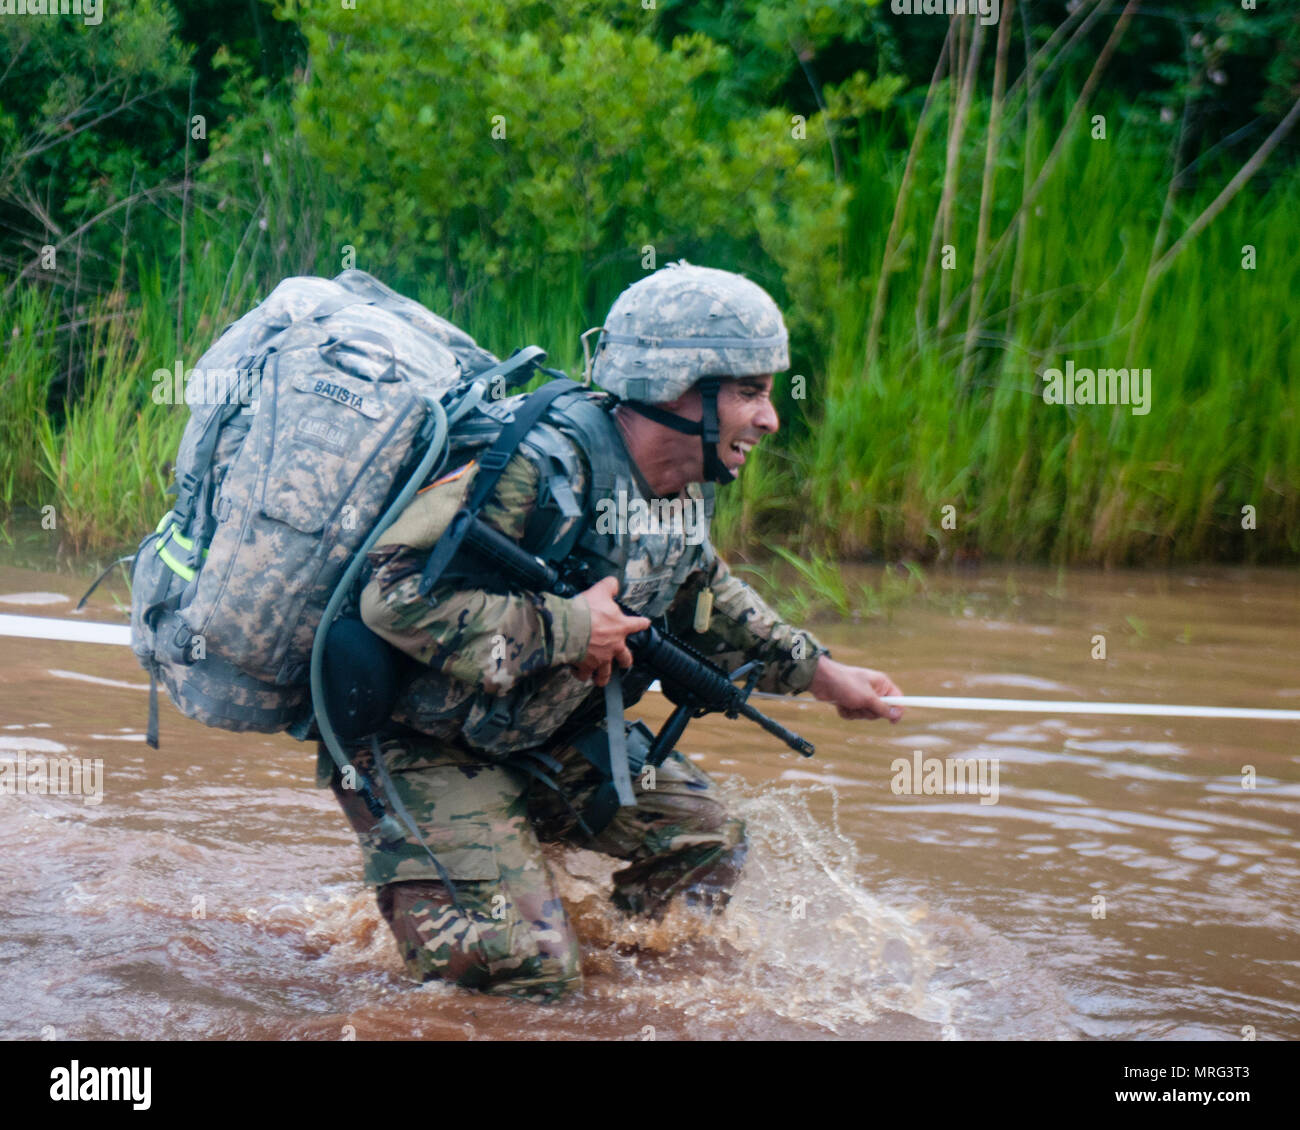 Sgt. Batista a chemical, biological, radiological and nuclear specialist representing the, 412th Theater Engineer Command crosses water during a 10-kilometer foot march at the 2017 U.S. Army Reserve Best Warrior Competition at Fort Bragg, N.C. June 13. This year's Best Warrior Competition will determine the top noncommissioned officer and junior enlisted Soldier who will represent the U.S. Army Reserve in the Department of the Army Best Warrior Competition later this year at Fort A.P. Hill, Va. (U.S. Army Reserve photo by Trenton Fouche) (Released) Stock Photo